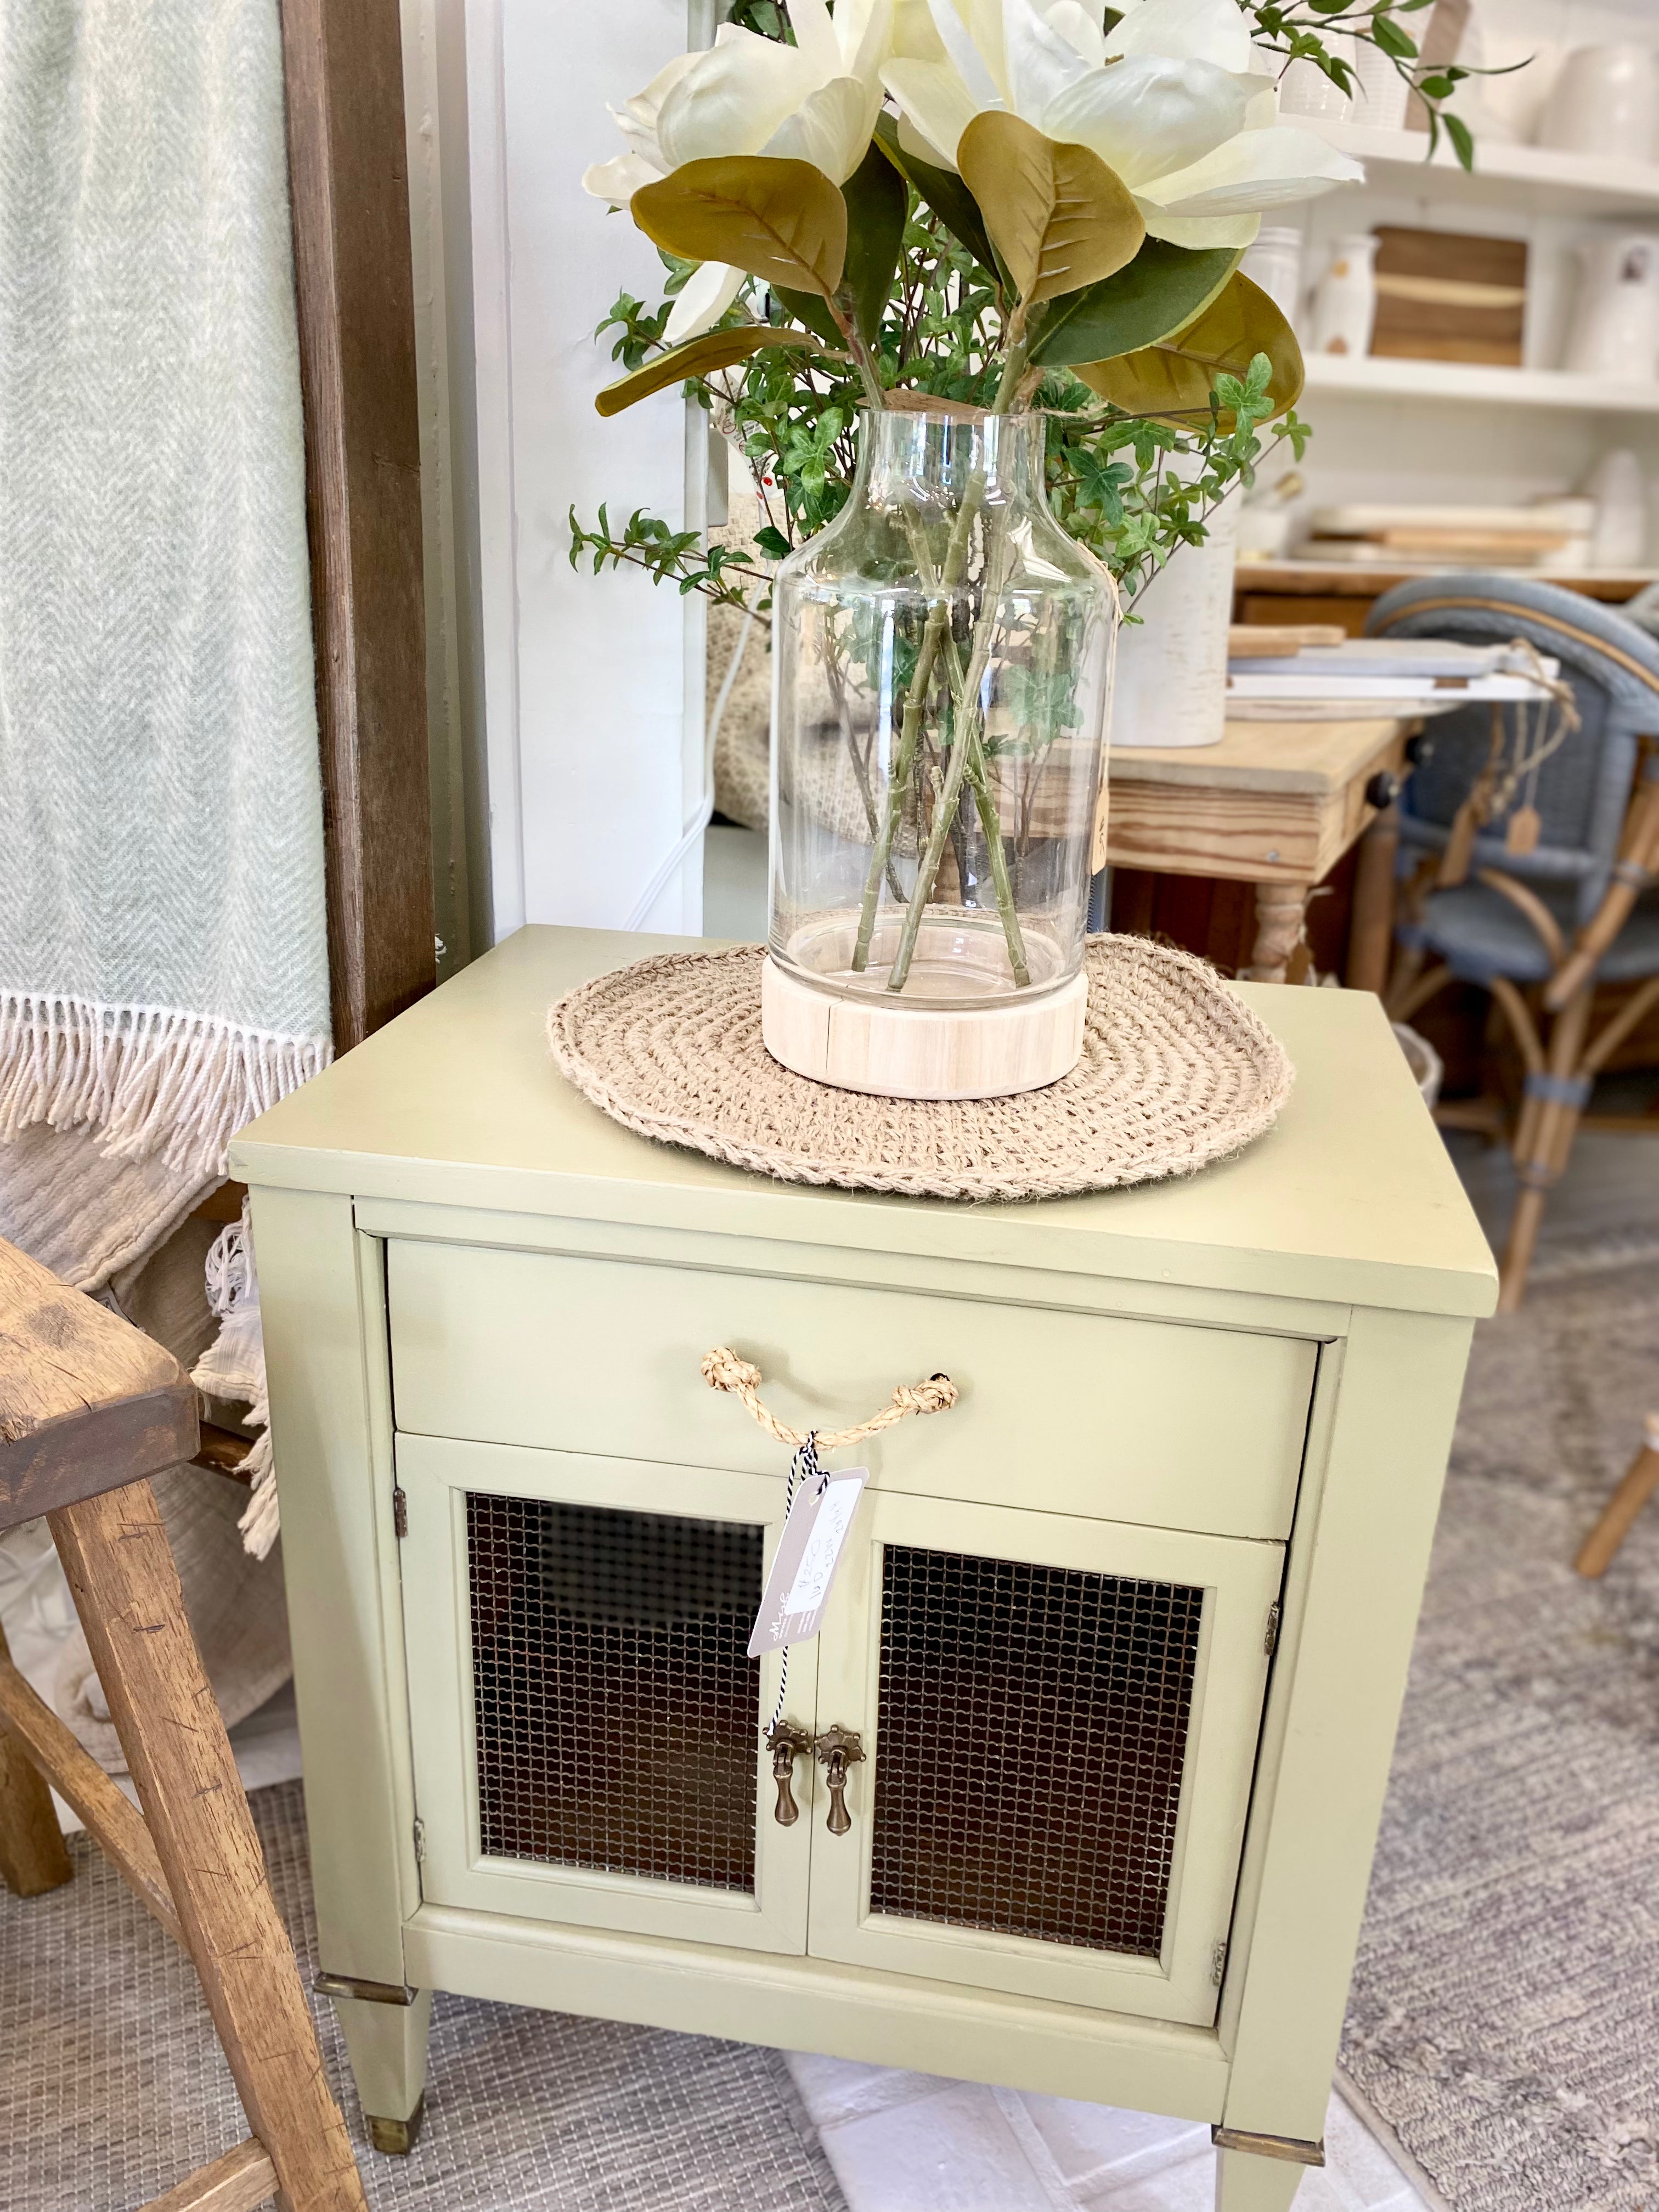 Vintage refinished sage green small cabinet - Design by Mish 